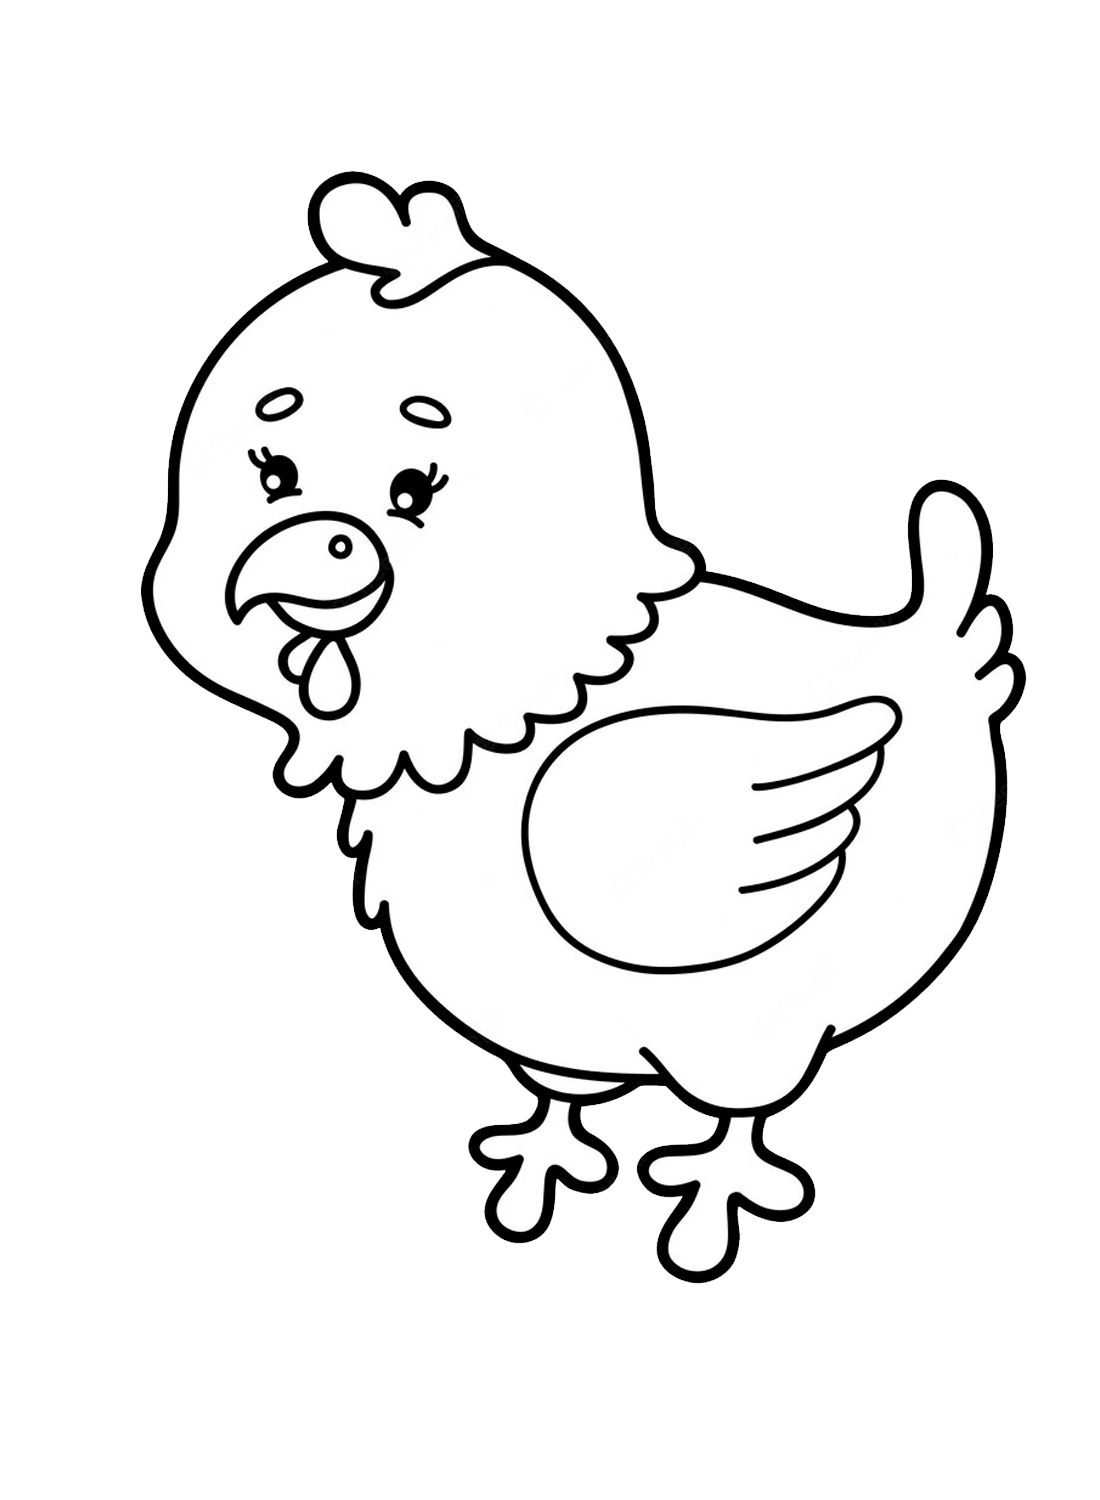 Sad chick Coloring Pages